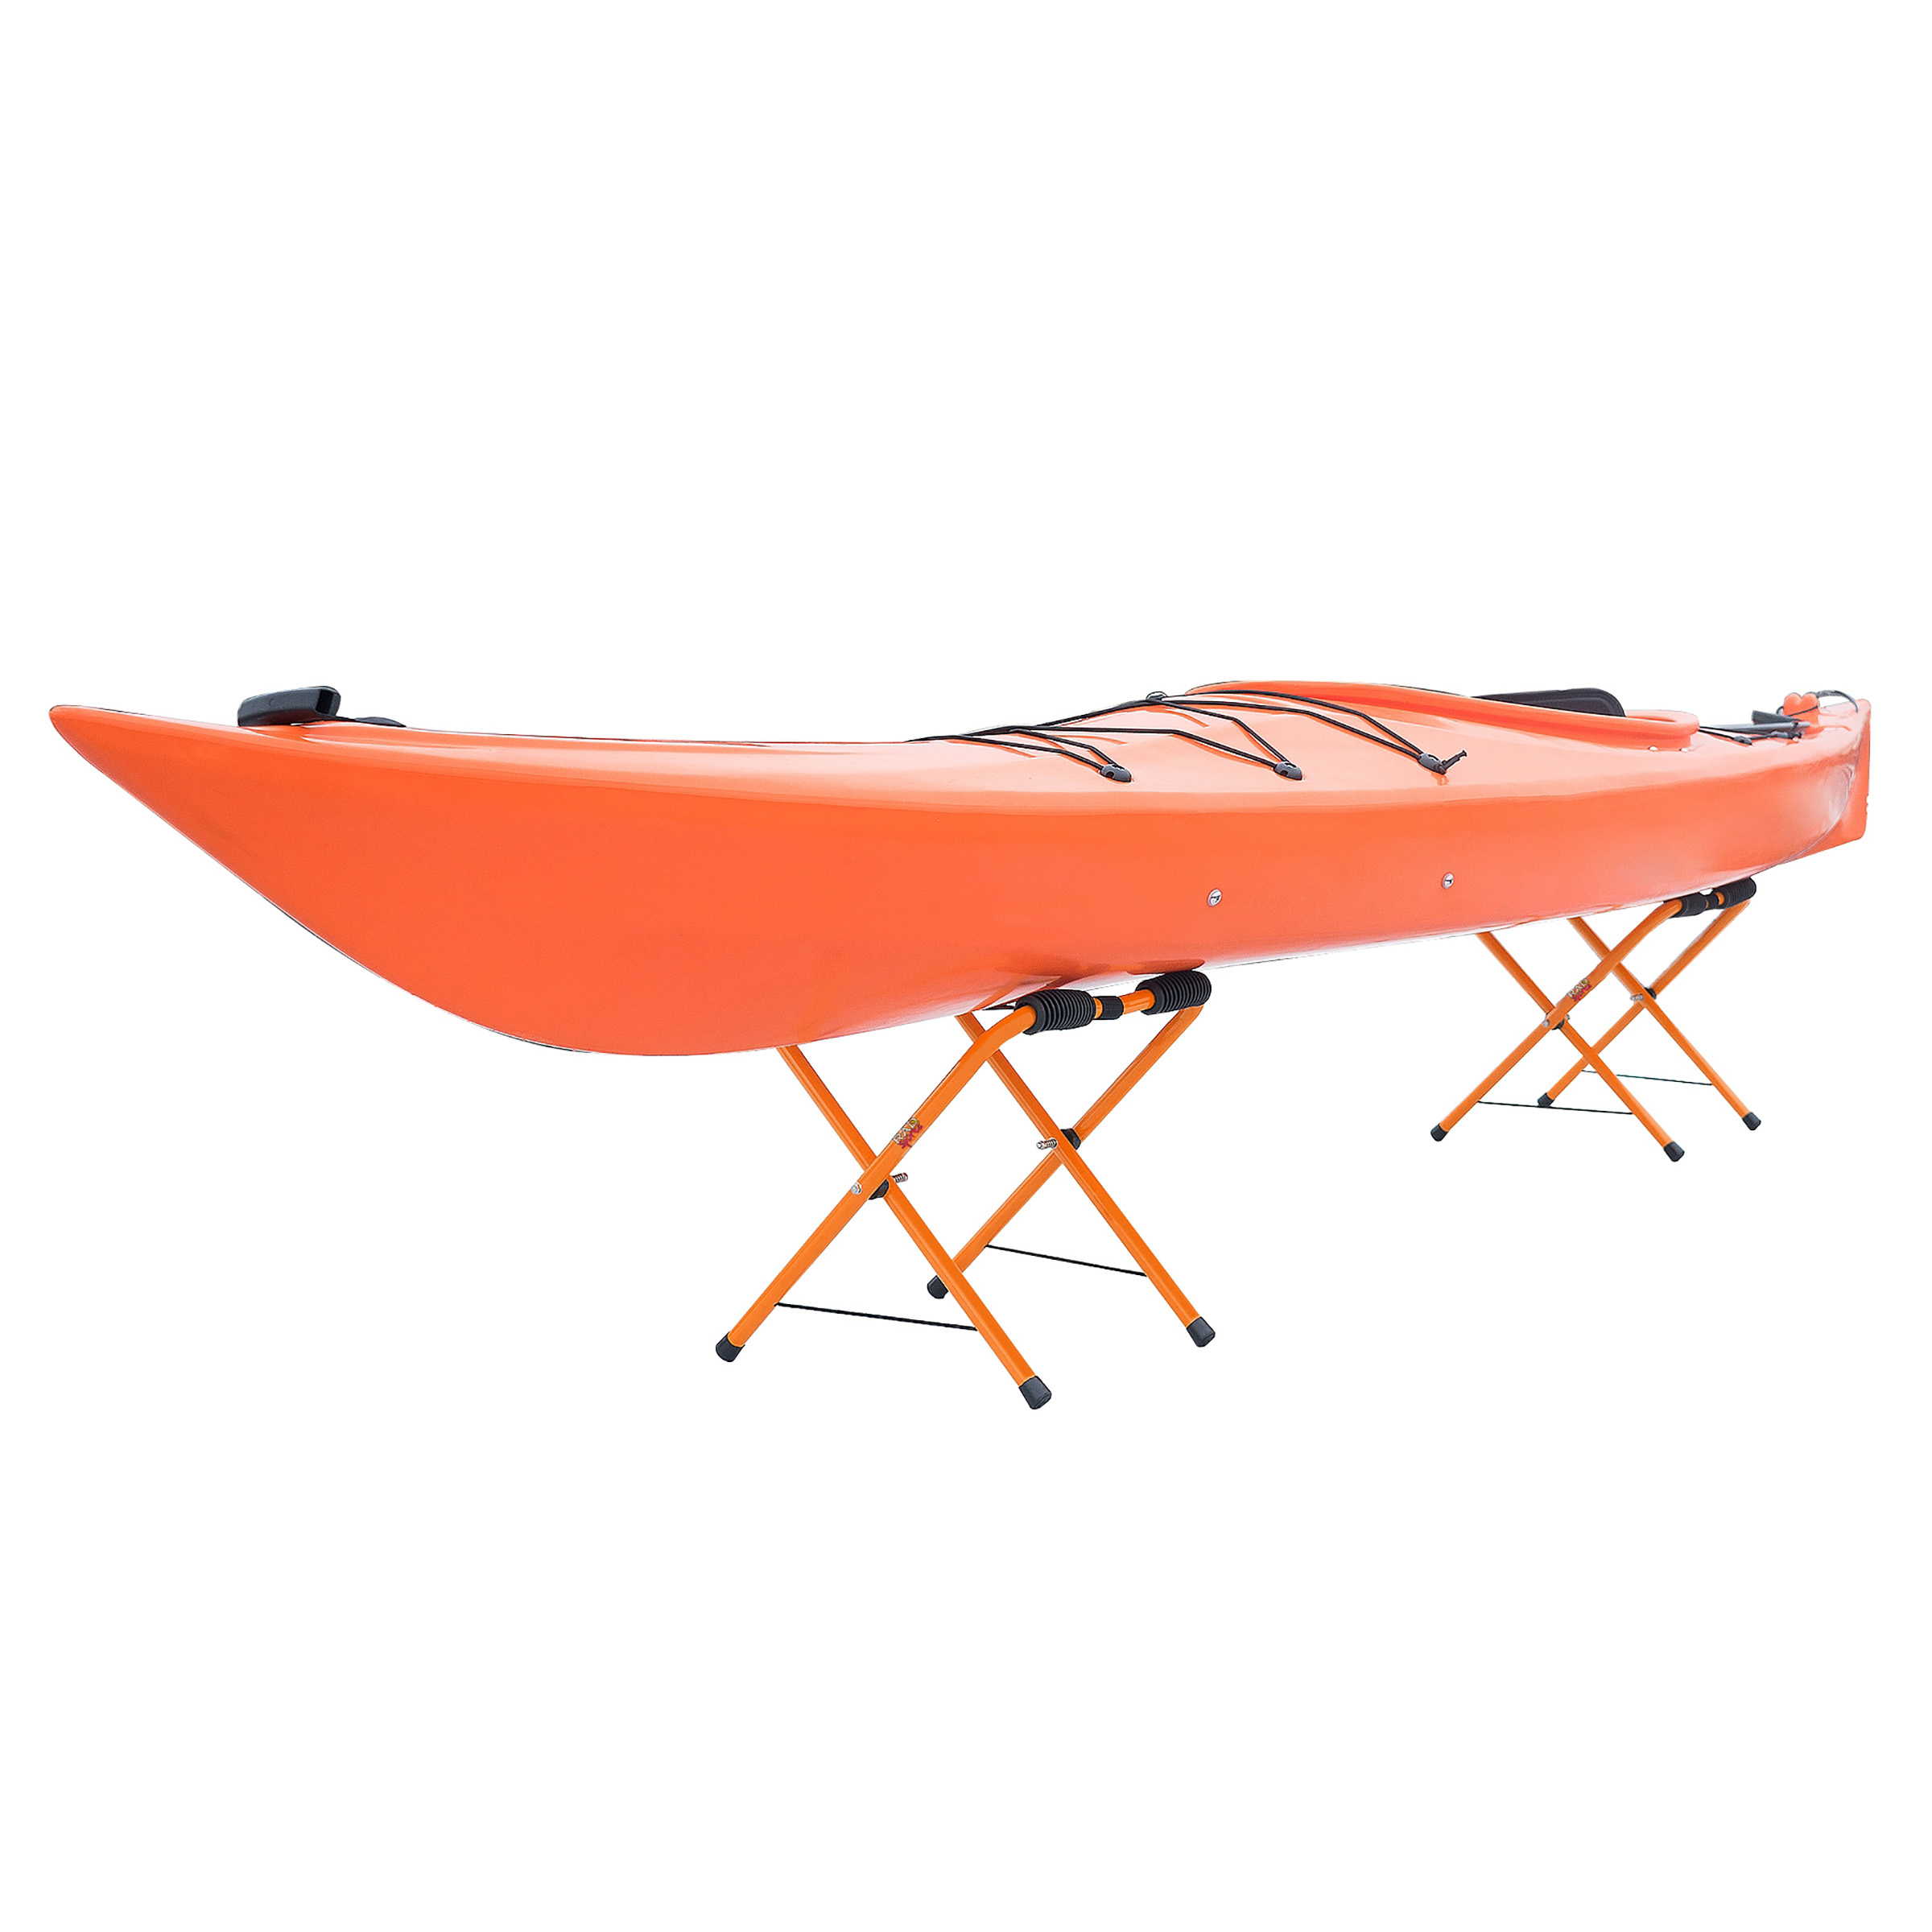 RAD Sportz Portable Kayak Paddle Board Easy Stands Fold For Easy Storage Carry Bag Included